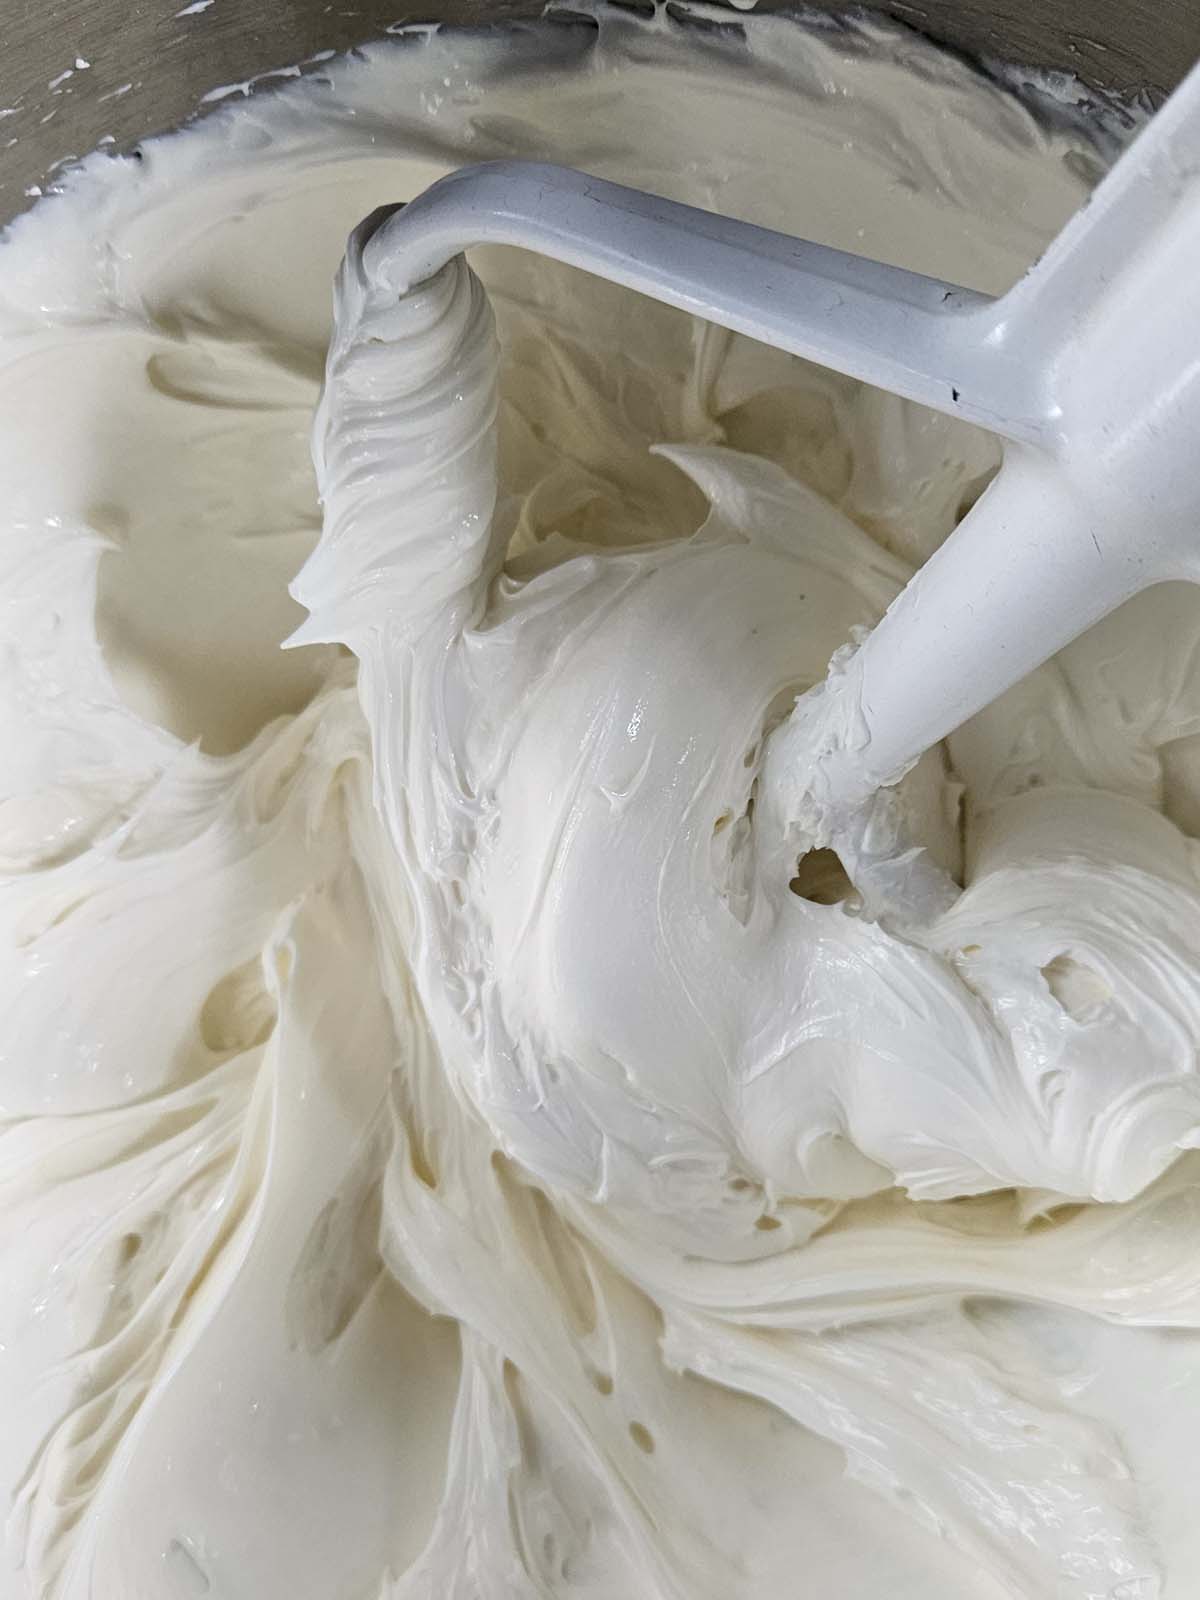 Whipped marscapone cheese.